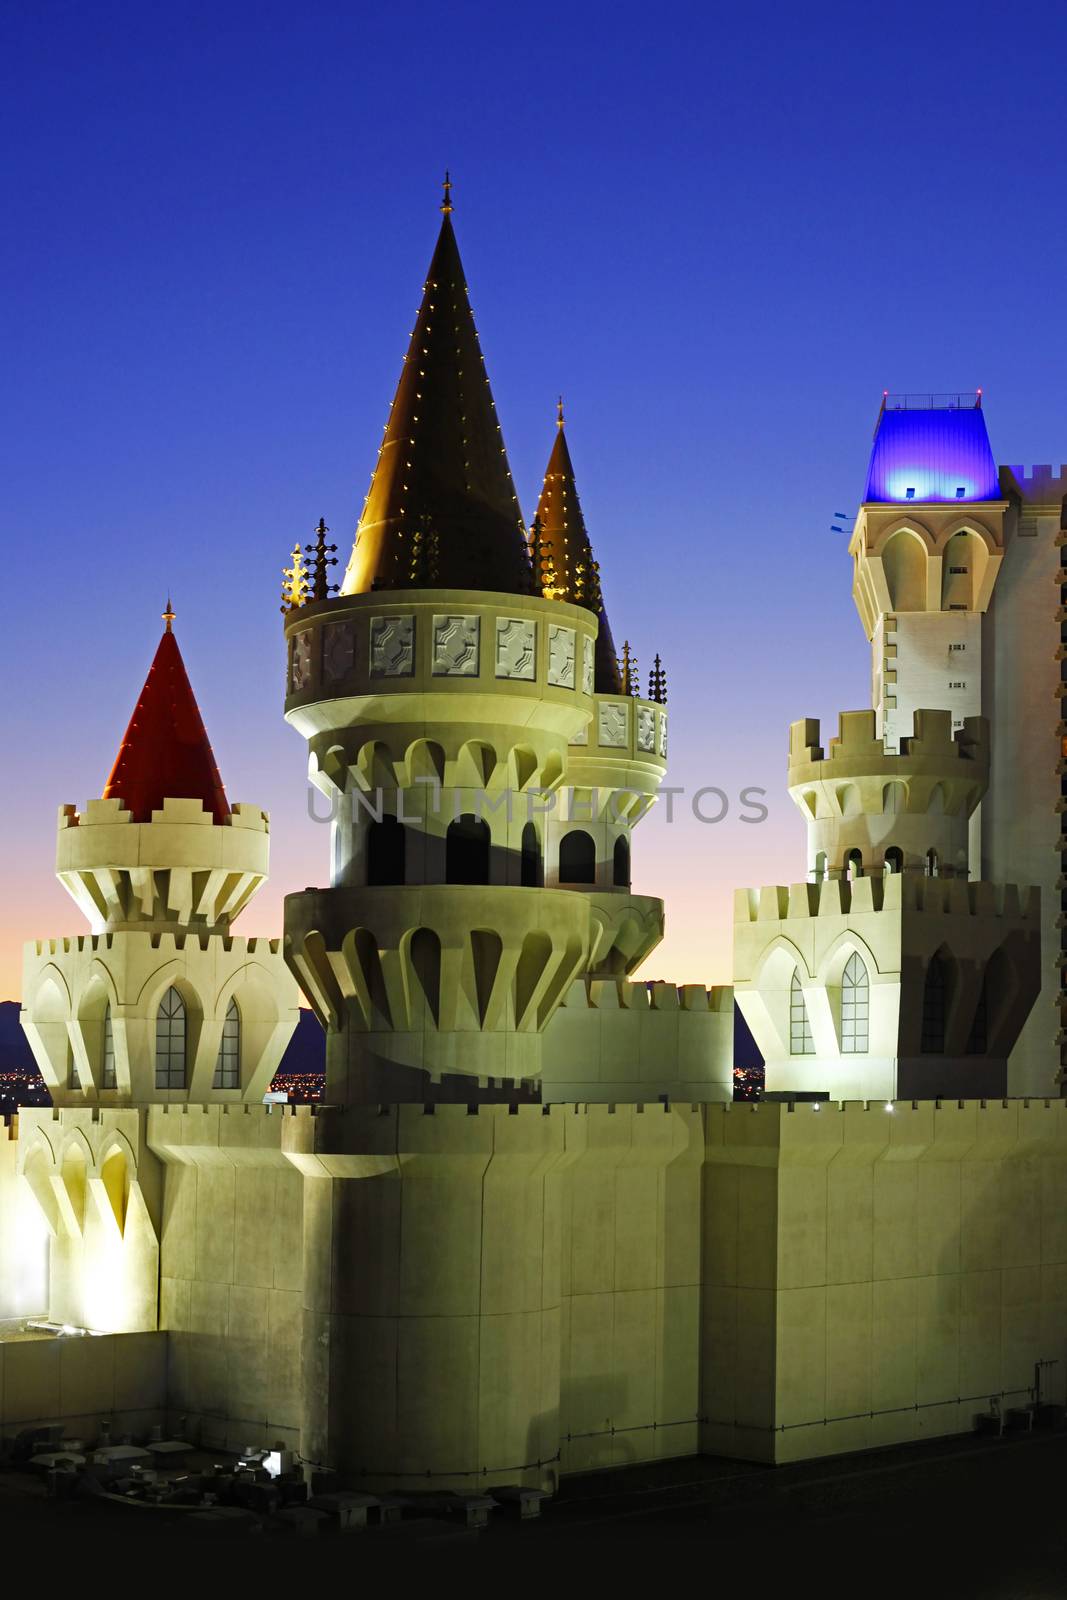 Las Vegas, Nevada, USA - September 19, 2011: The Excalibur Hotel & Casino is shown in this image taken at night on September 19, 2011 in Las Vegas, Nevada.